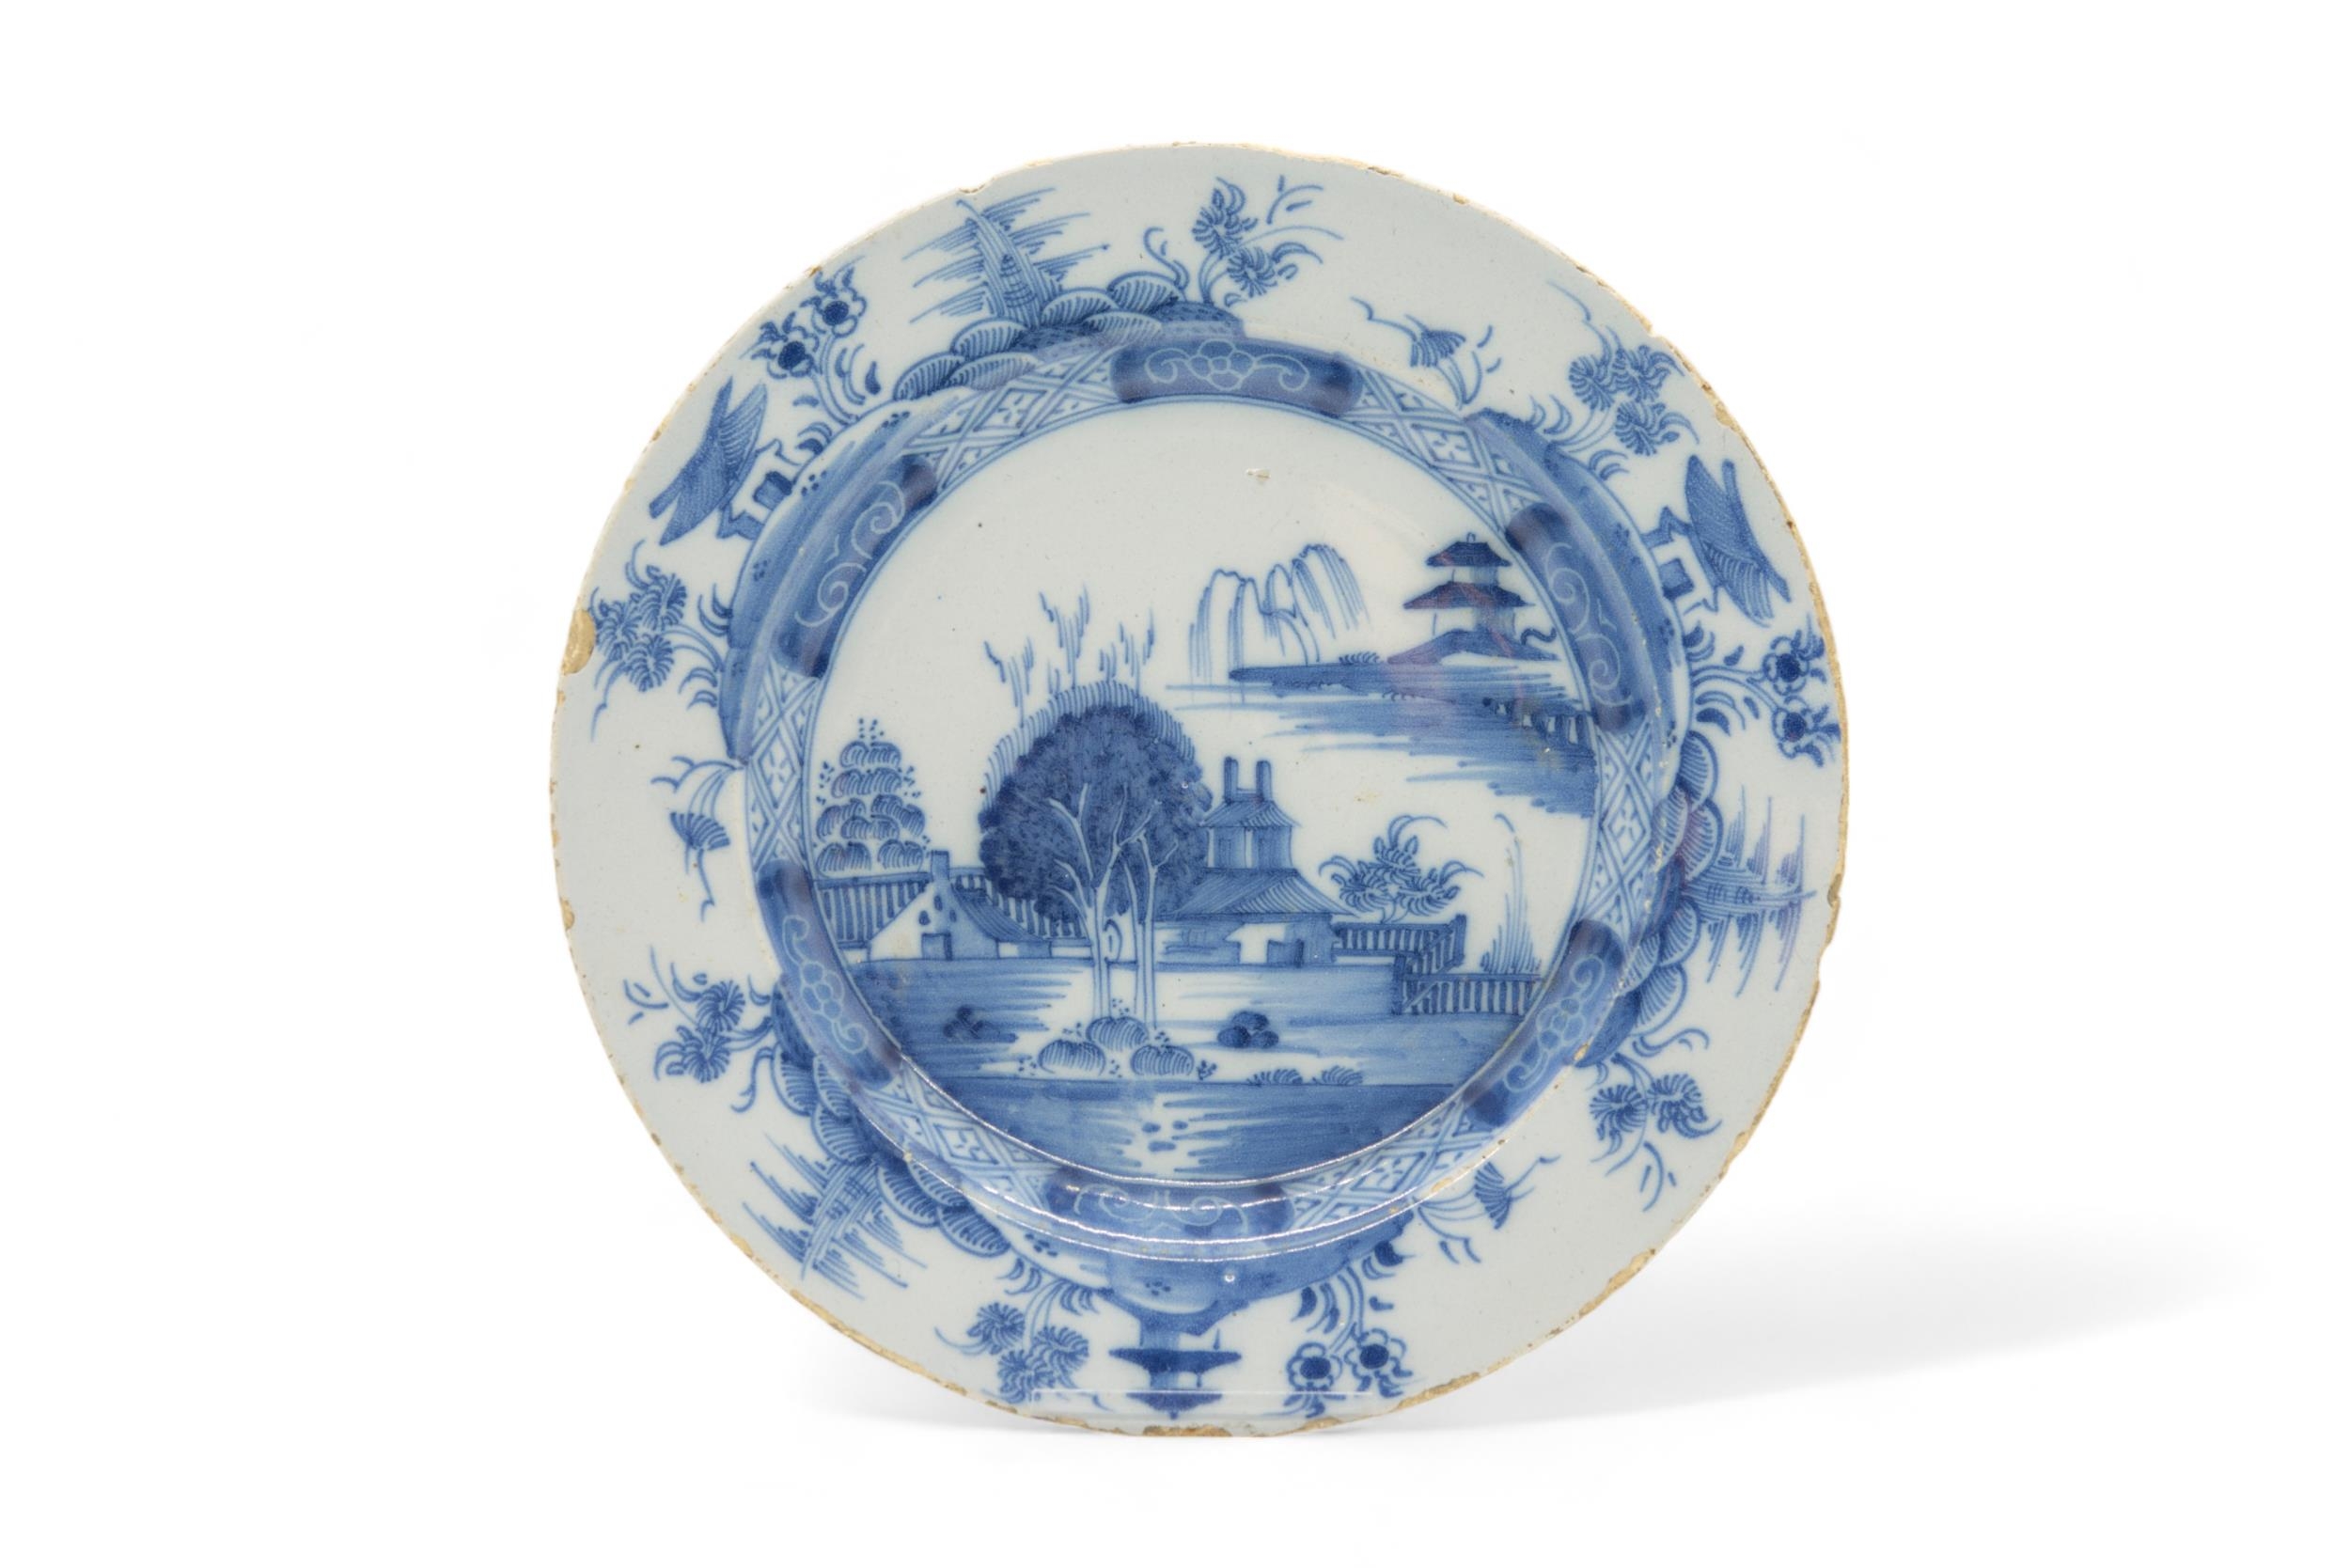 SIX DELFT PLATES 18th Century, one inscribed "T.M.LANE", 23cms wide - Image 5 of 7